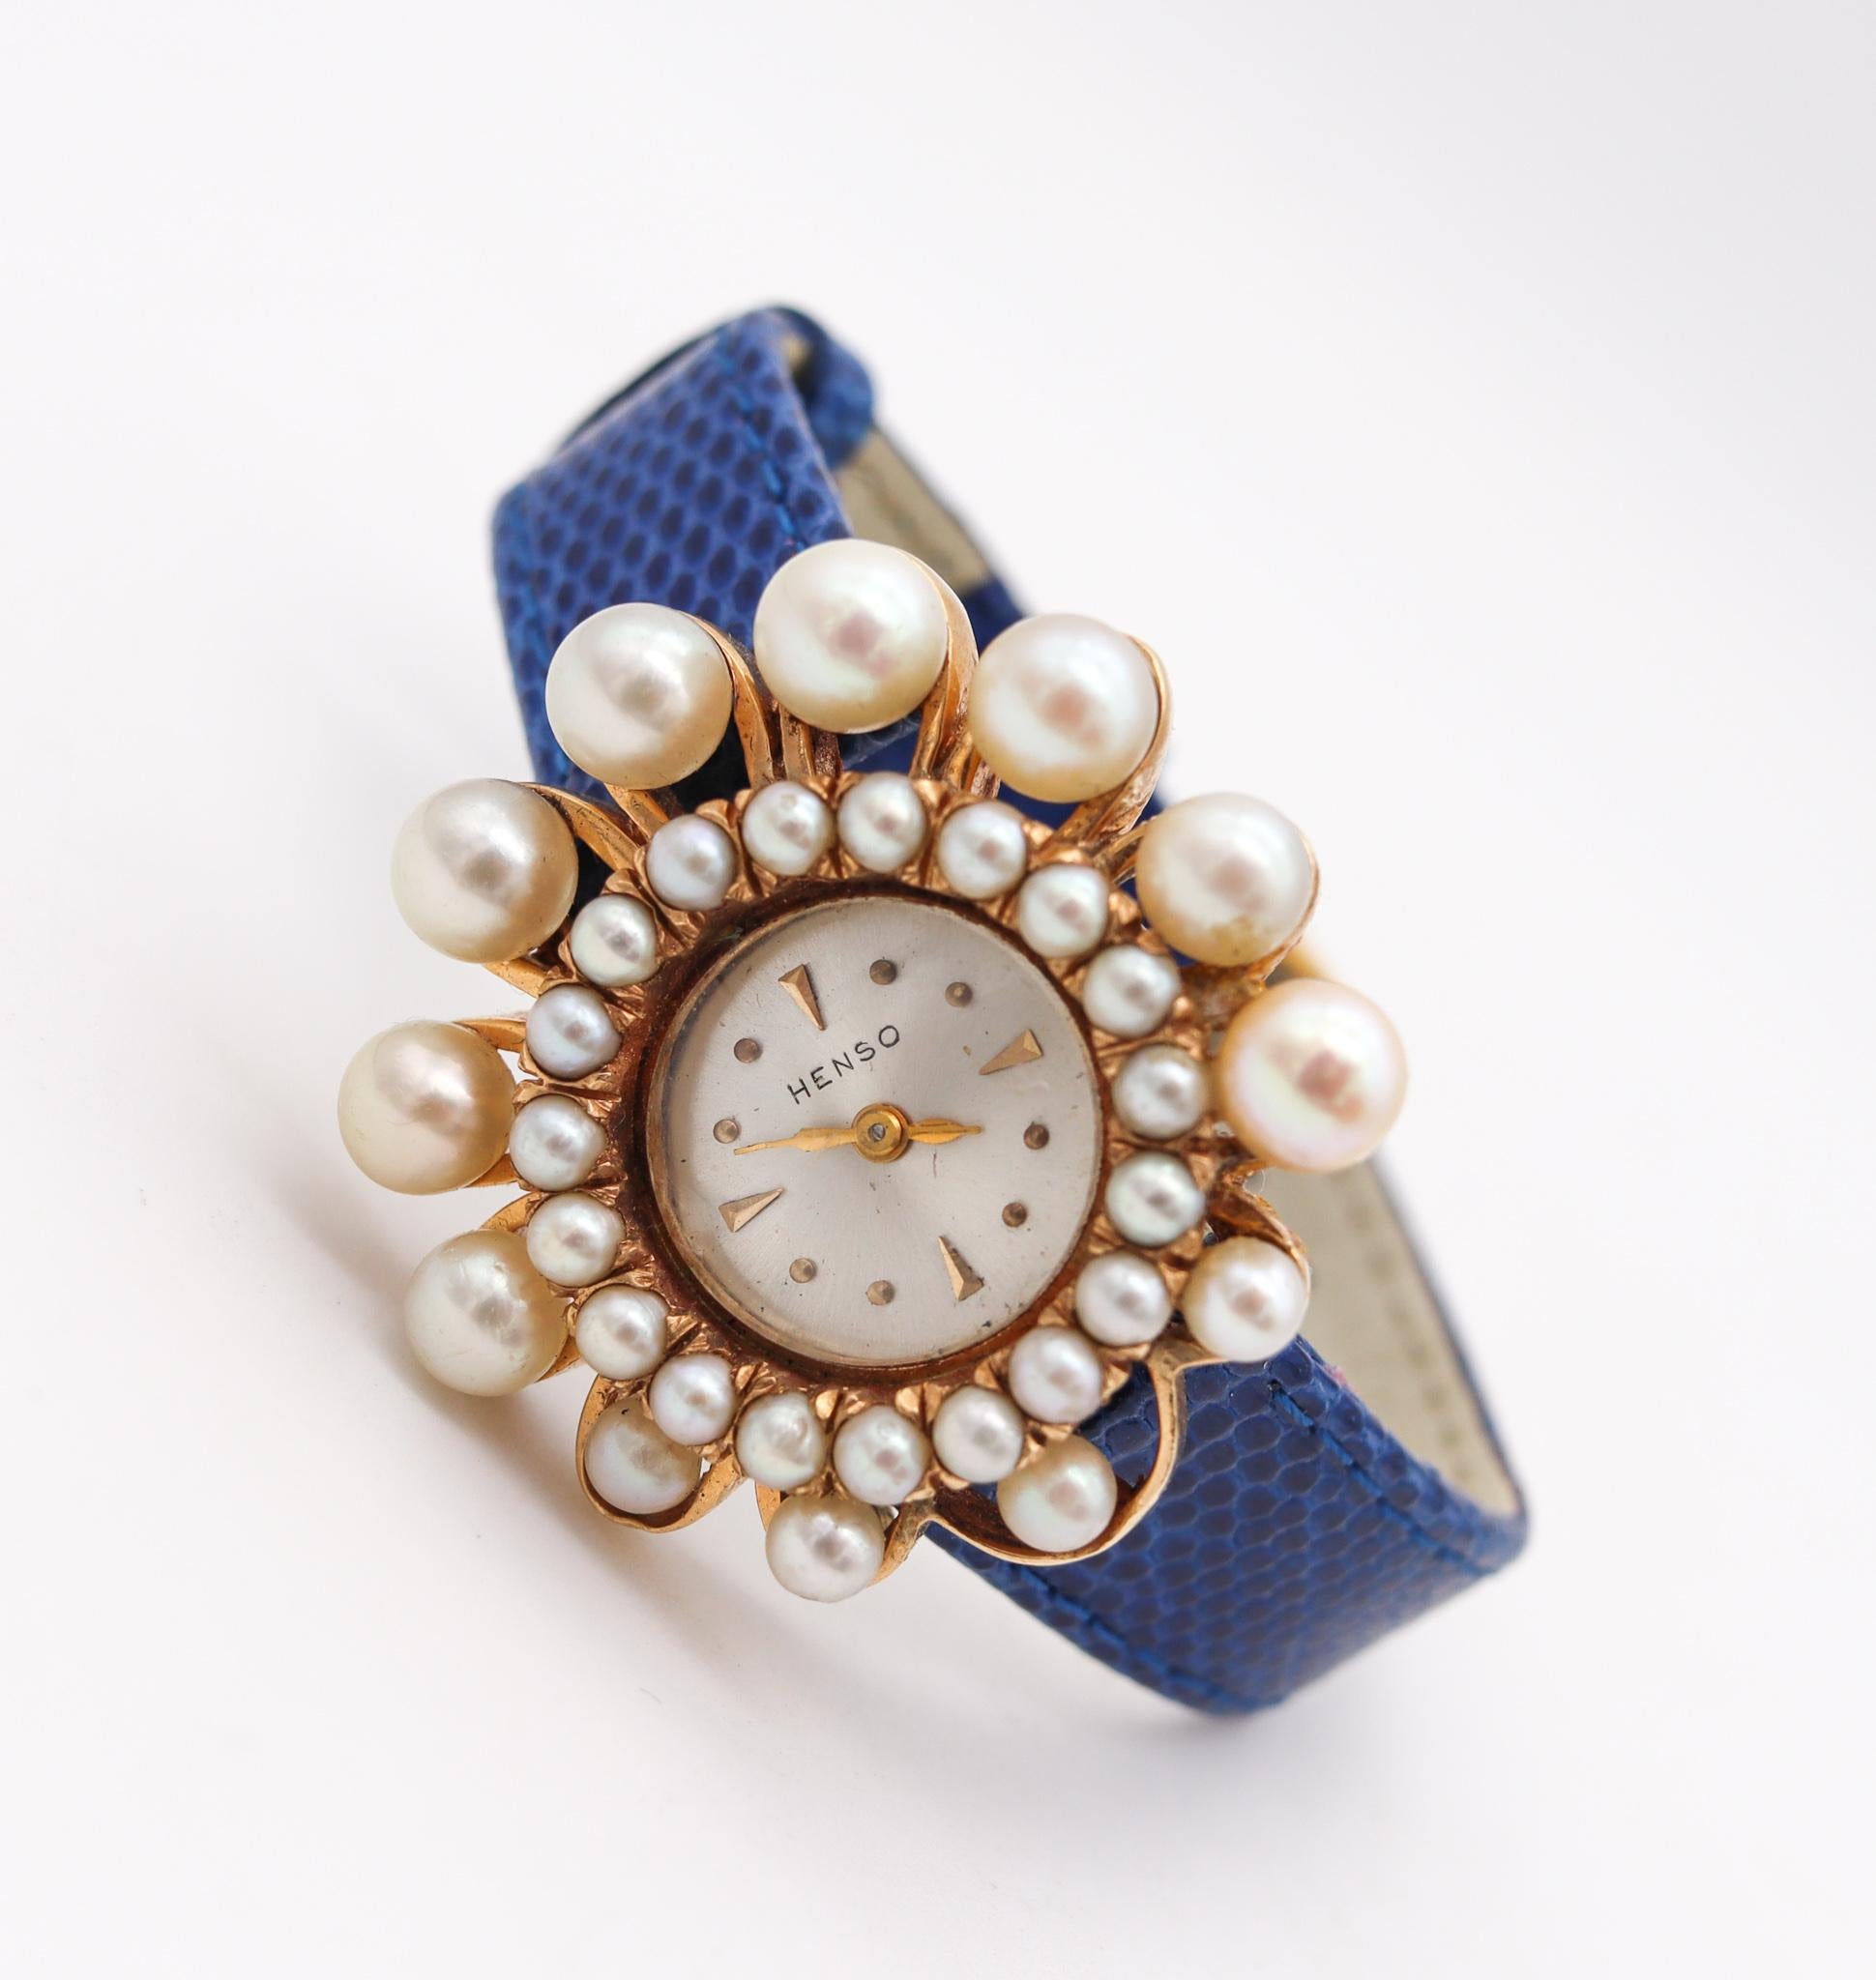 Modernist retro wristwatch designed by the Henso Watch Co.

Very elegant women wristwatch, created during the mid century period by the Henso Watch Co. This piece has a very terrific look with great eye appeal and was crafted in solid yellow gold of